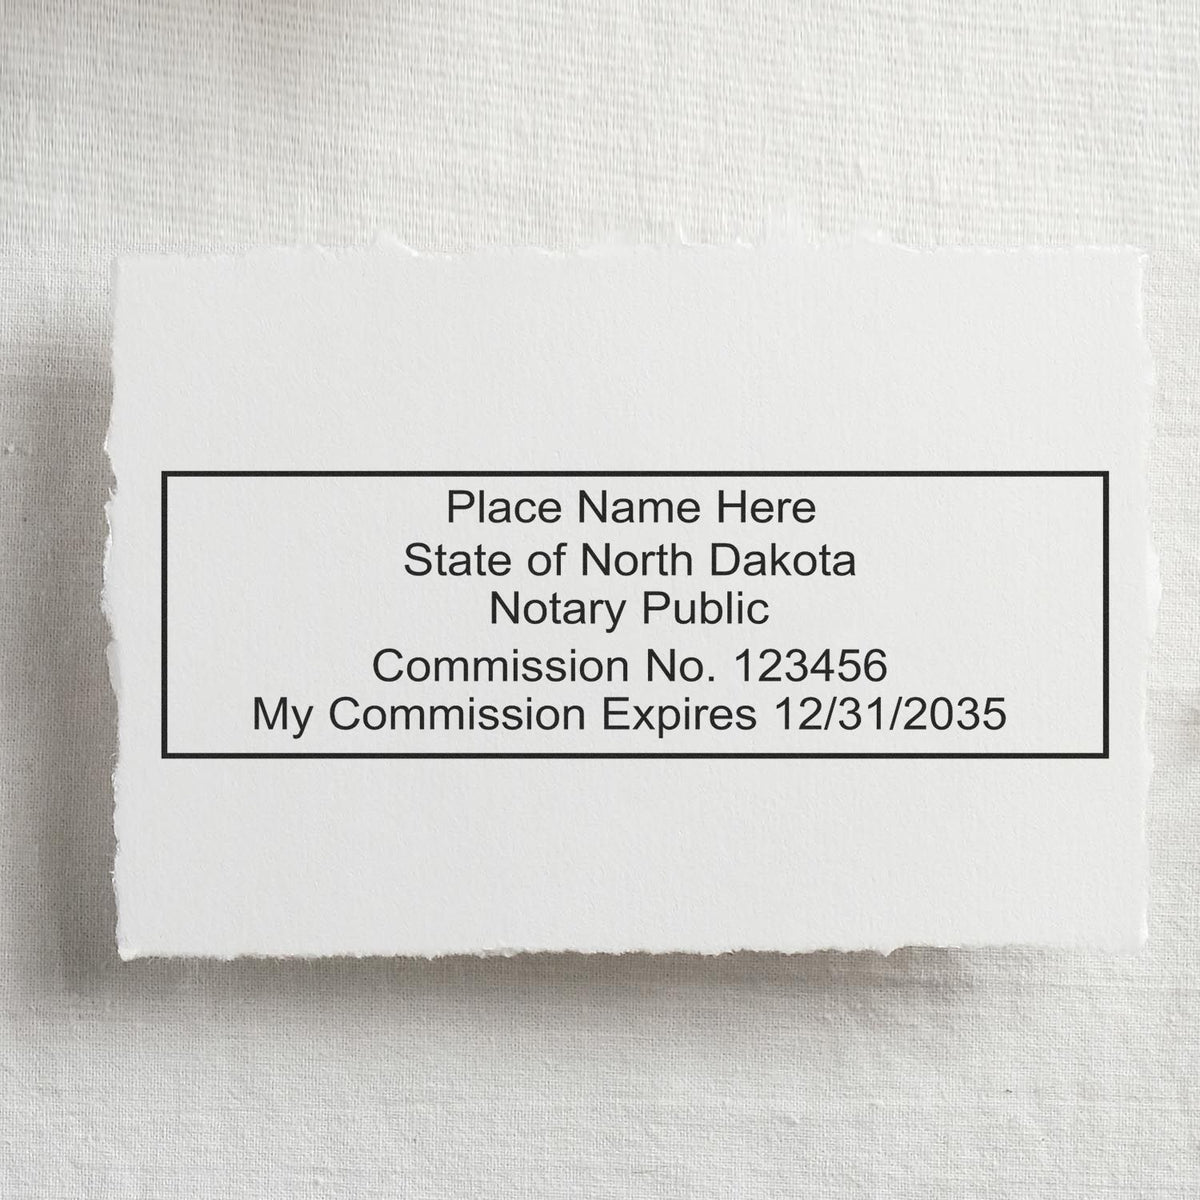 Another Example of a stamped impression of the Self-Inking Rectangular North Dakota Notary Stamp on a piece of office paper.